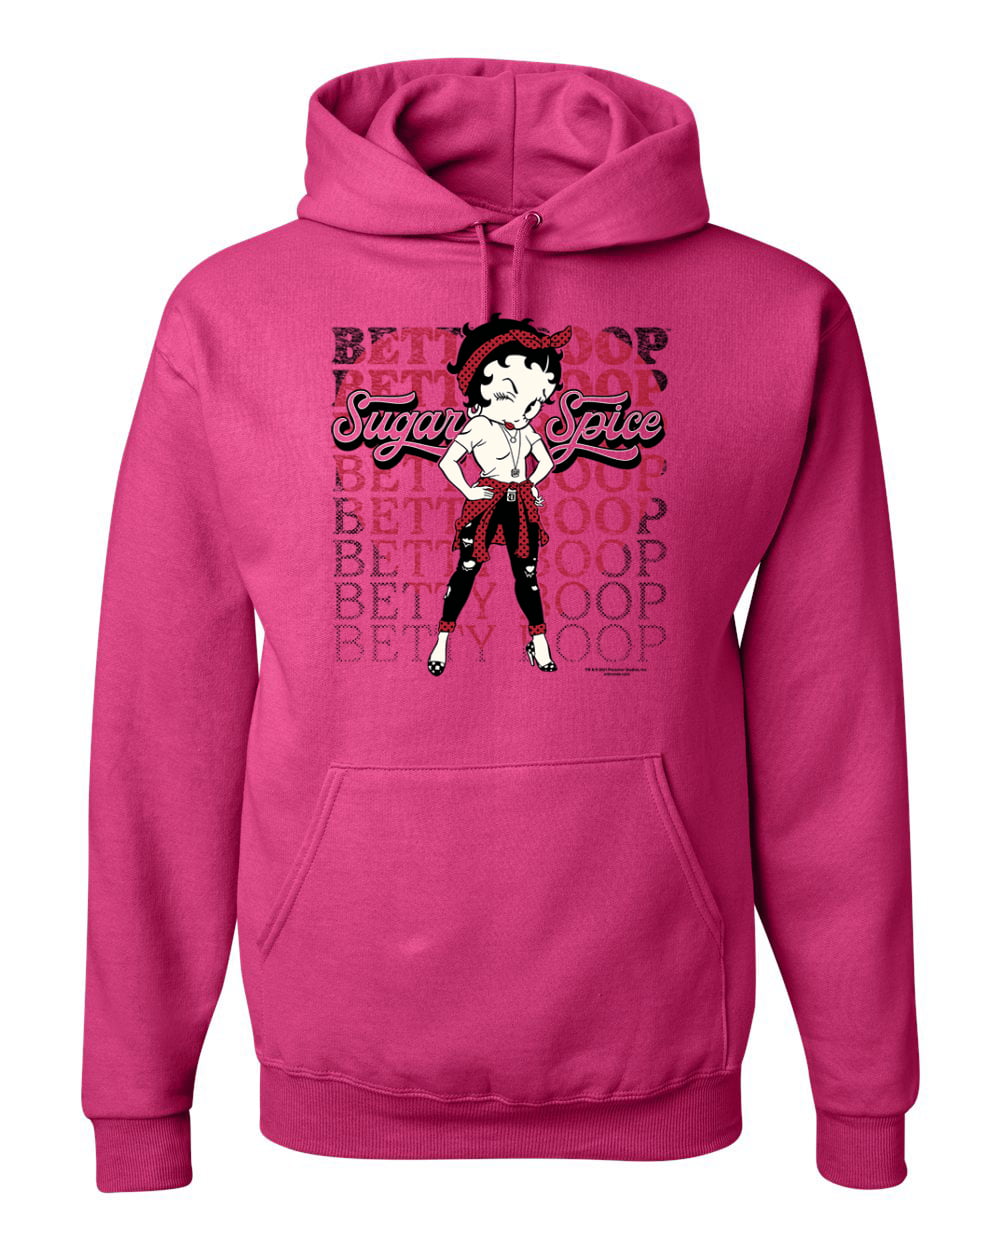 NEW XL 2X or 3X teen size PINK PANTHER WINK ZIP UP HOODIE print on front & back 